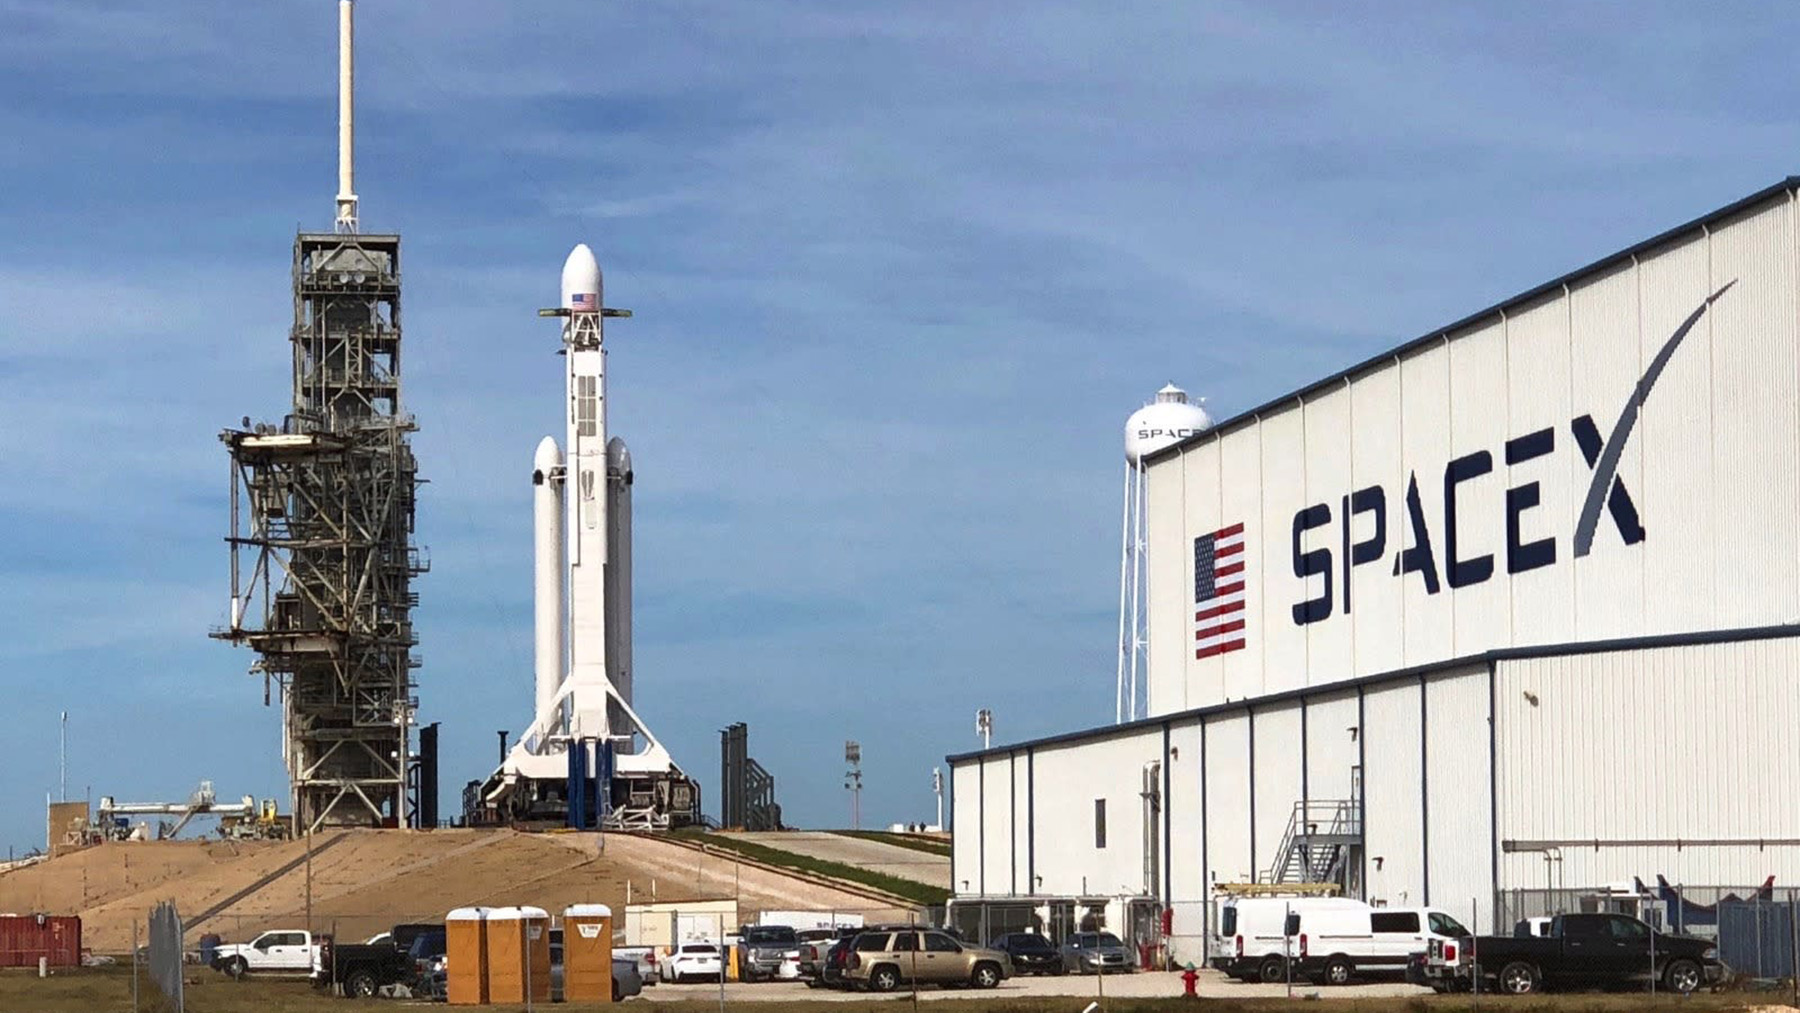       SpaceX -  